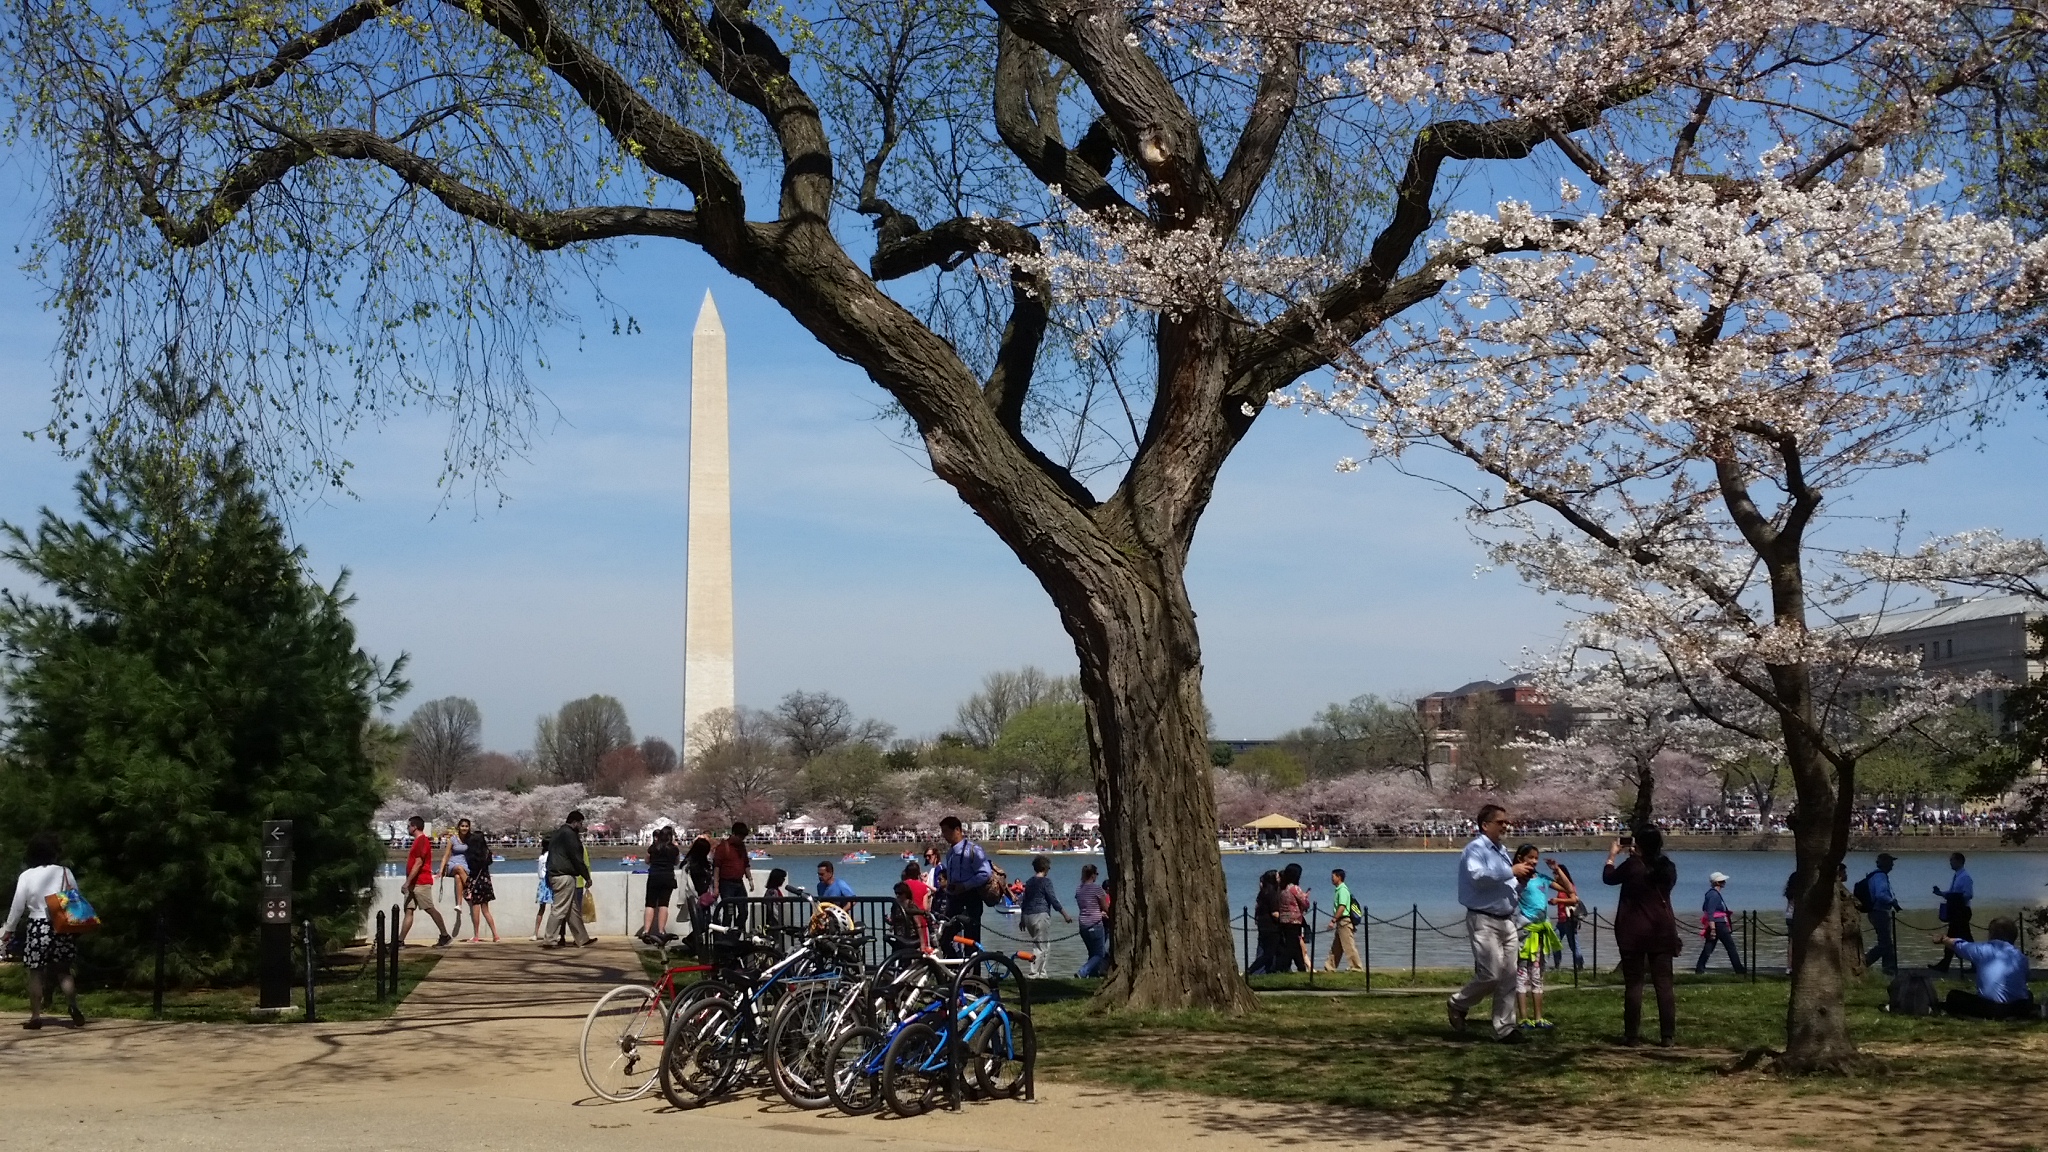 The Washington Monument with cherry trees in the foreground. Photo taken on March 24, 2016